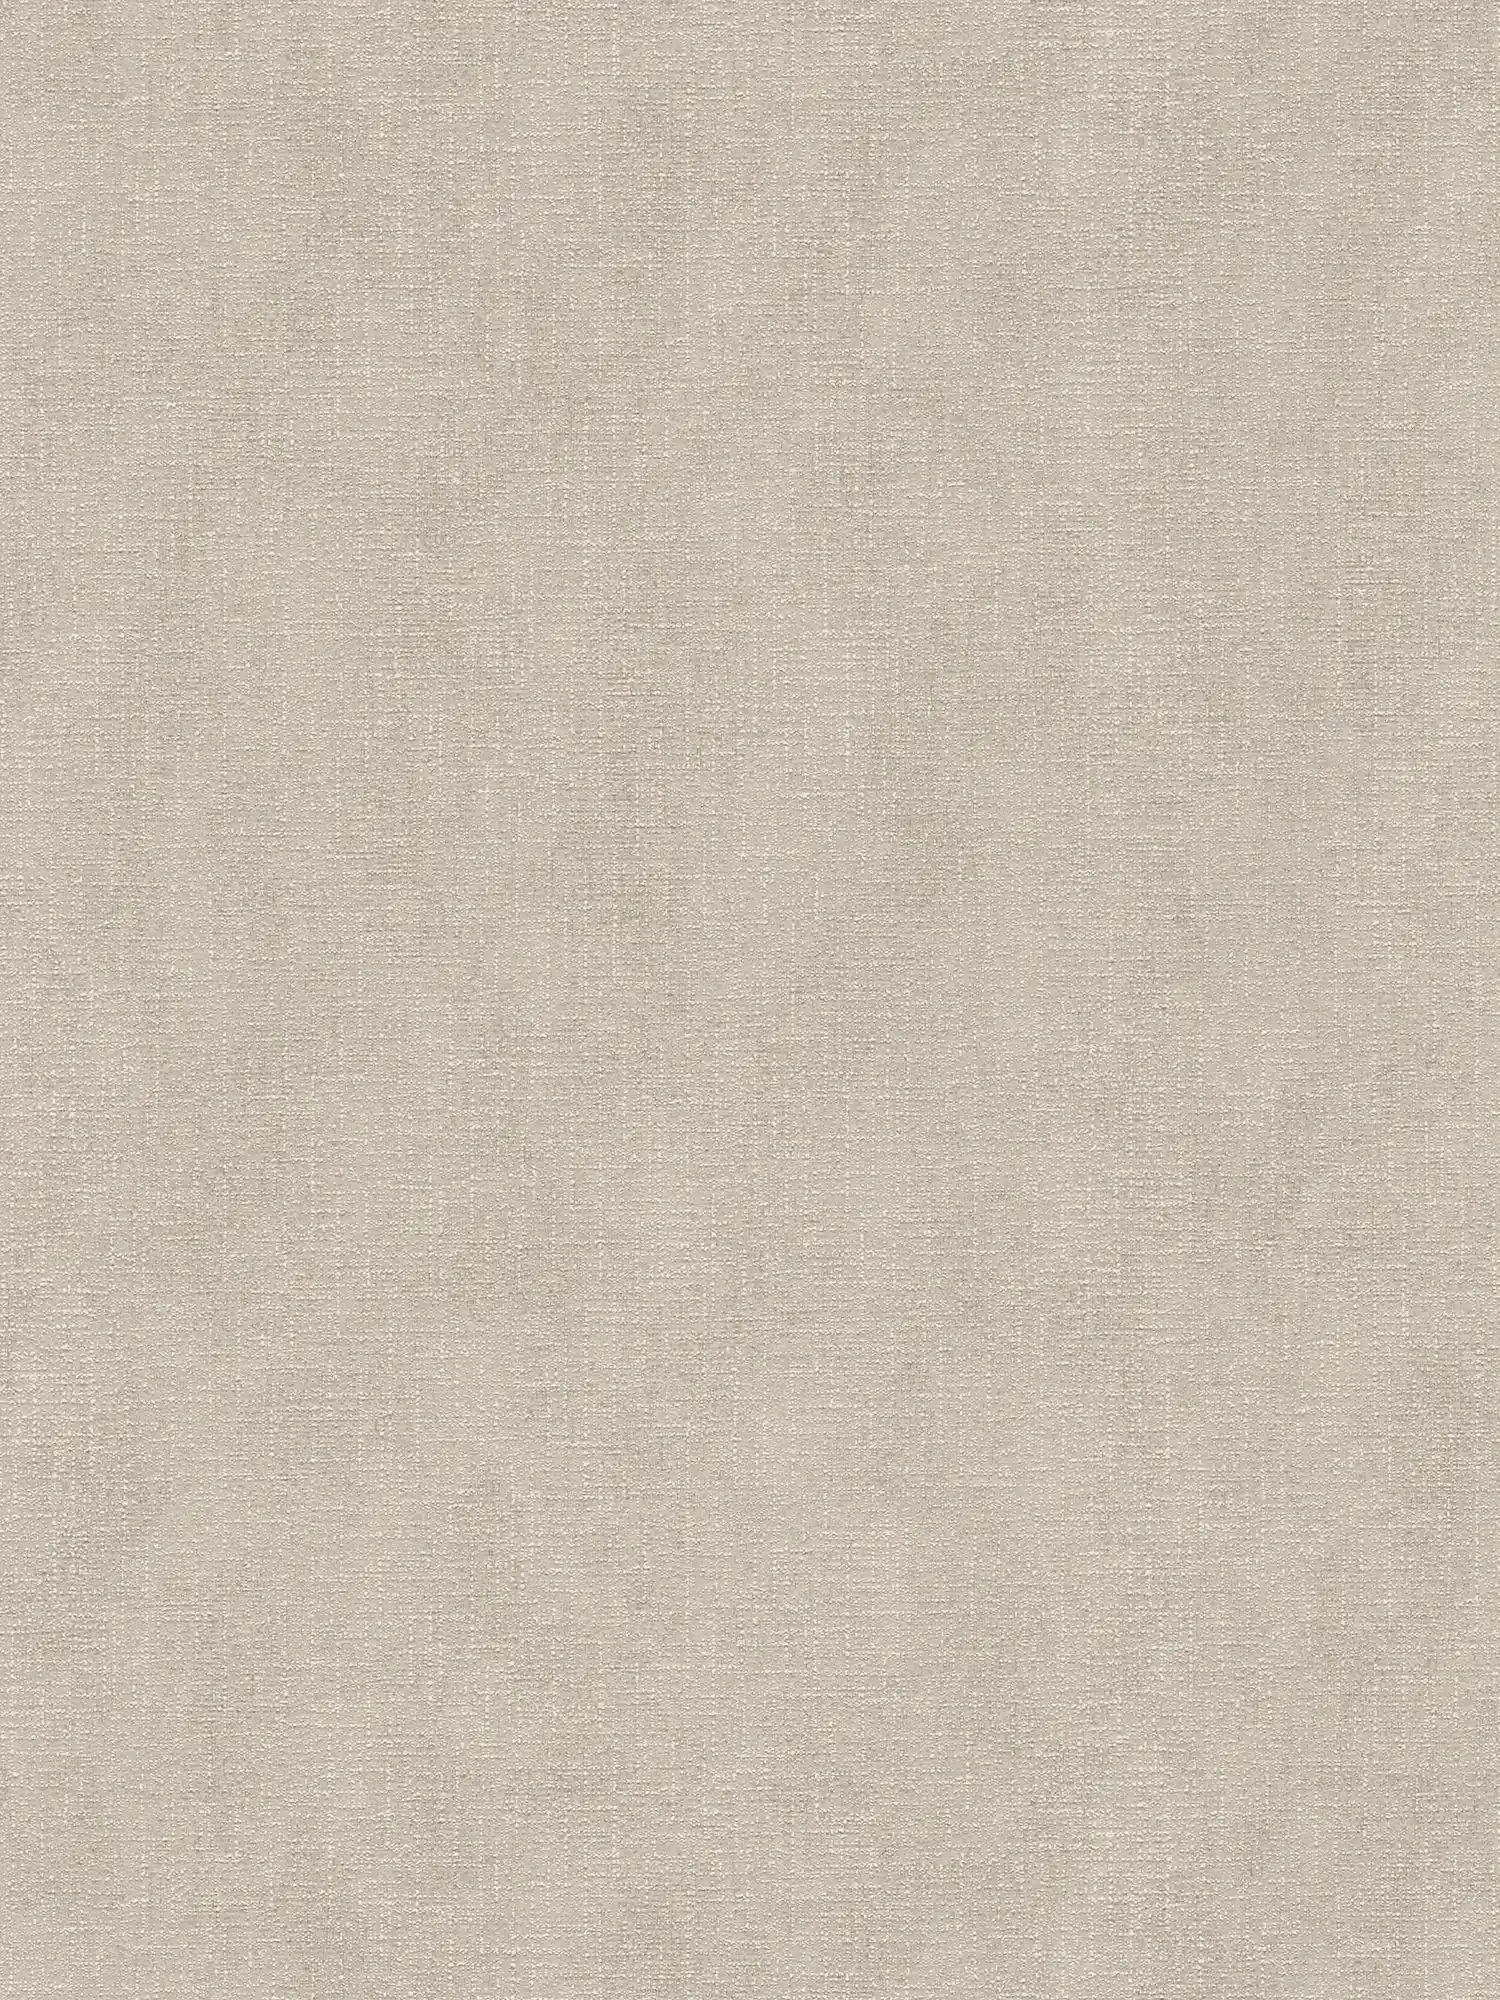 Light grey non-woven wallpaper with shimmer finish and textured pattern - grey
